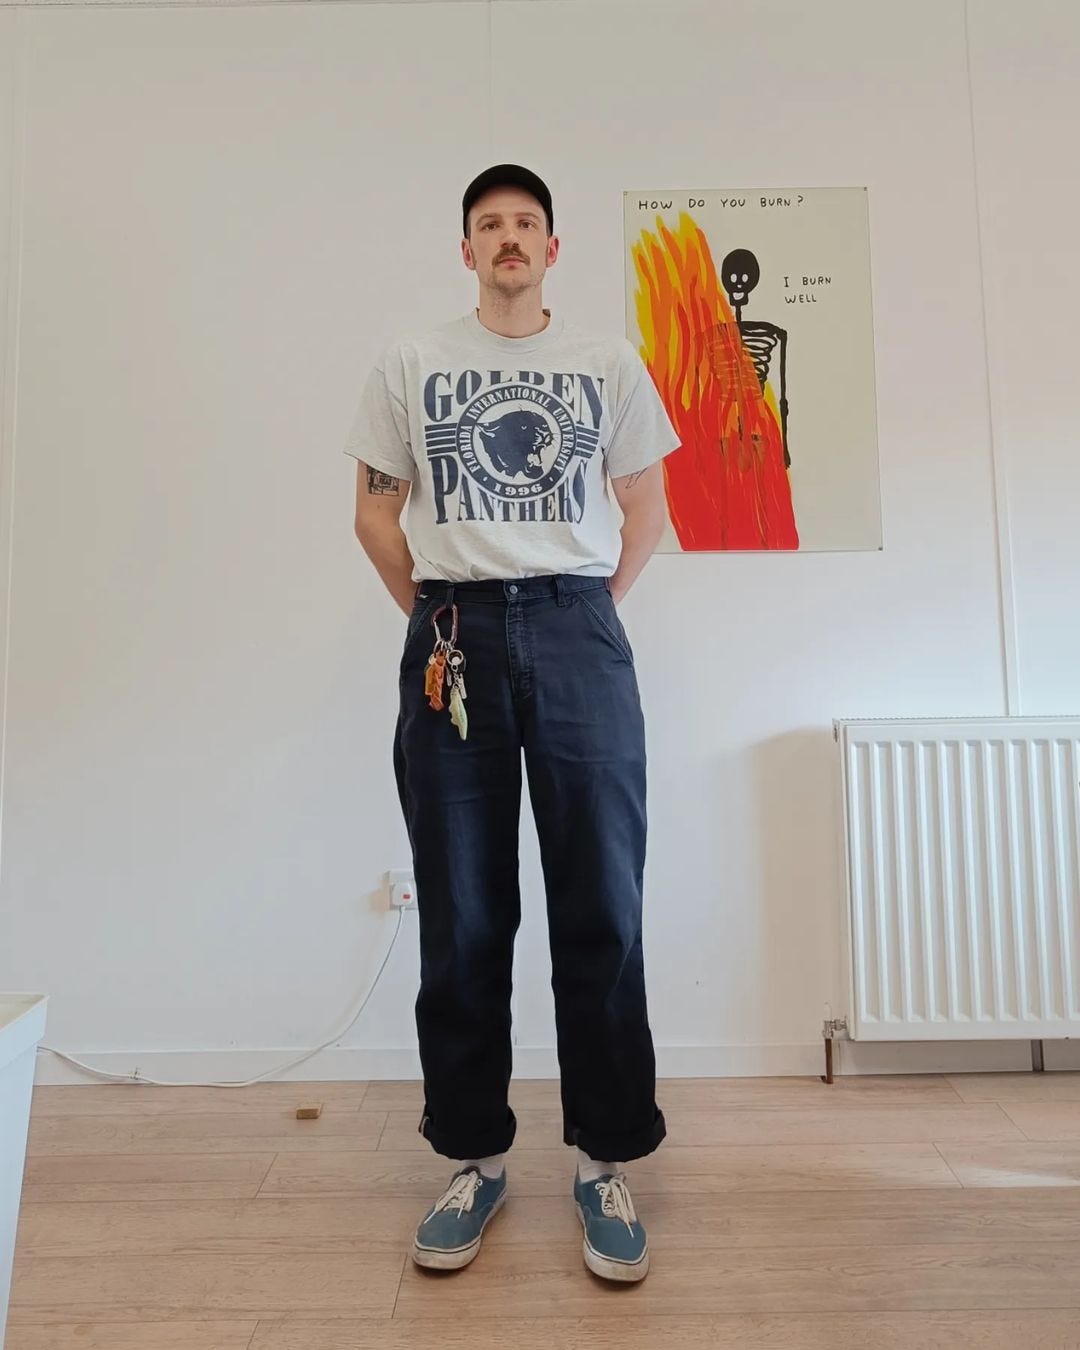 man standing in front of a white wall with a bright-colored painting on it, wearing a graphic t-shirt with dark pants and blue sneakers